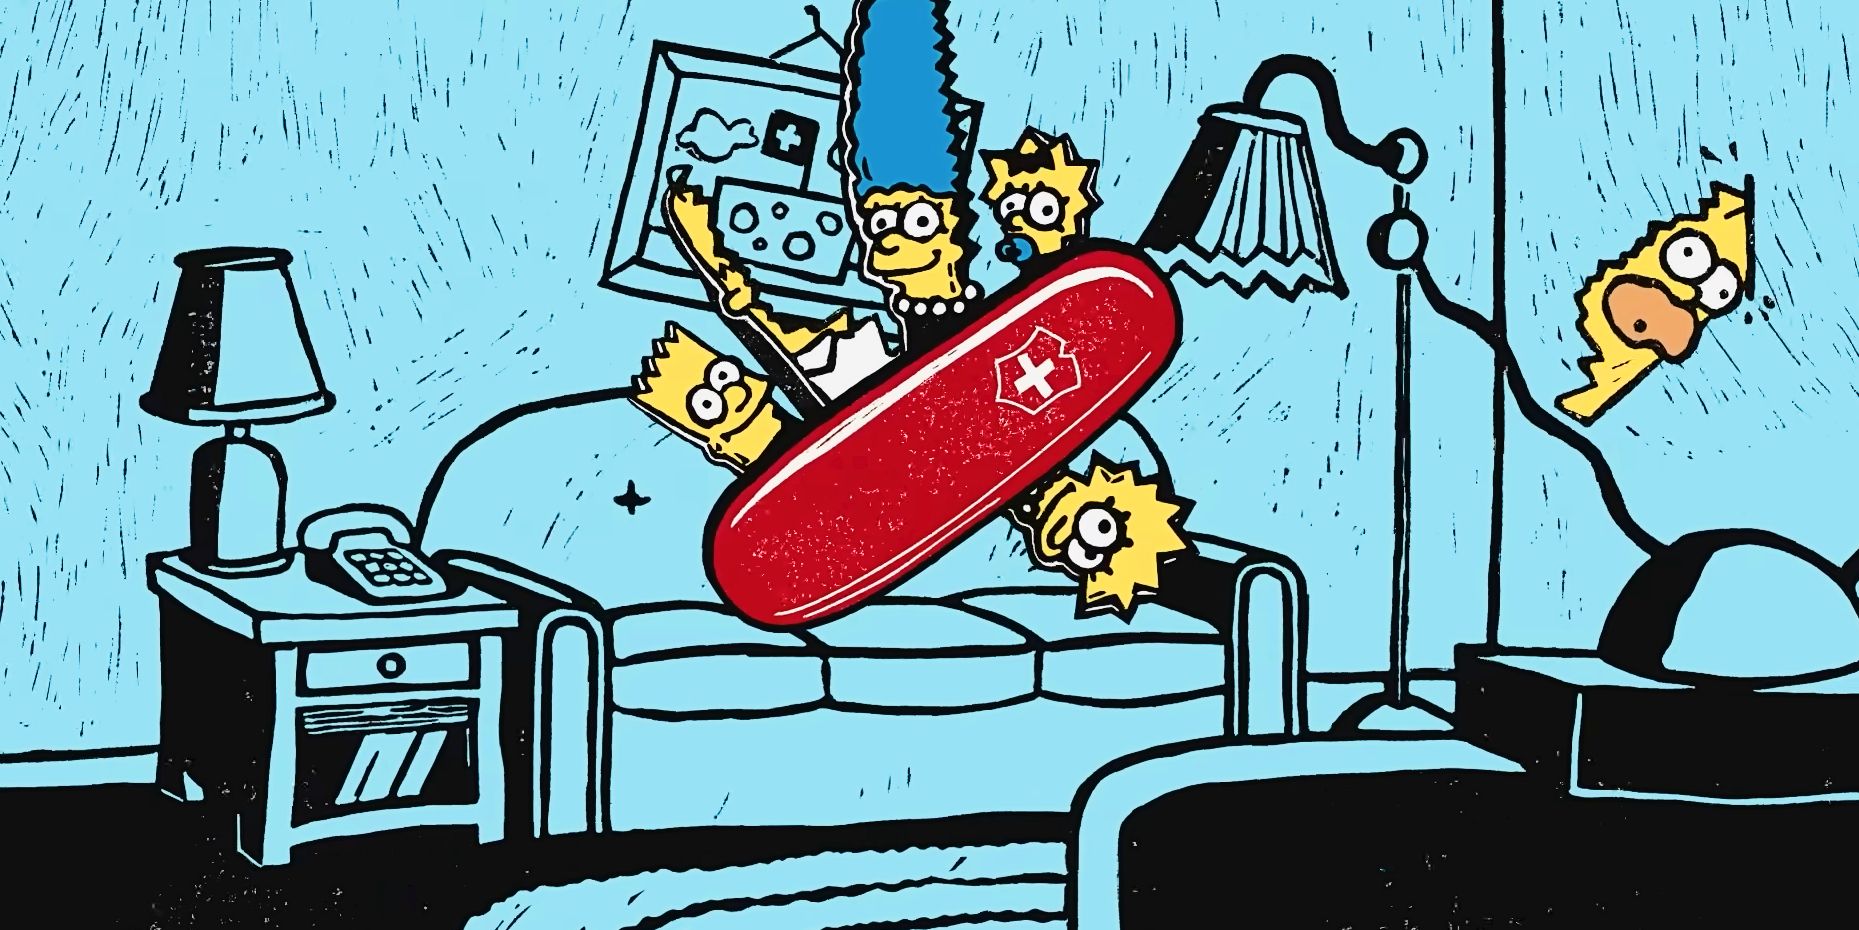 The Simpsons as a Swiss army knife in a couch gag